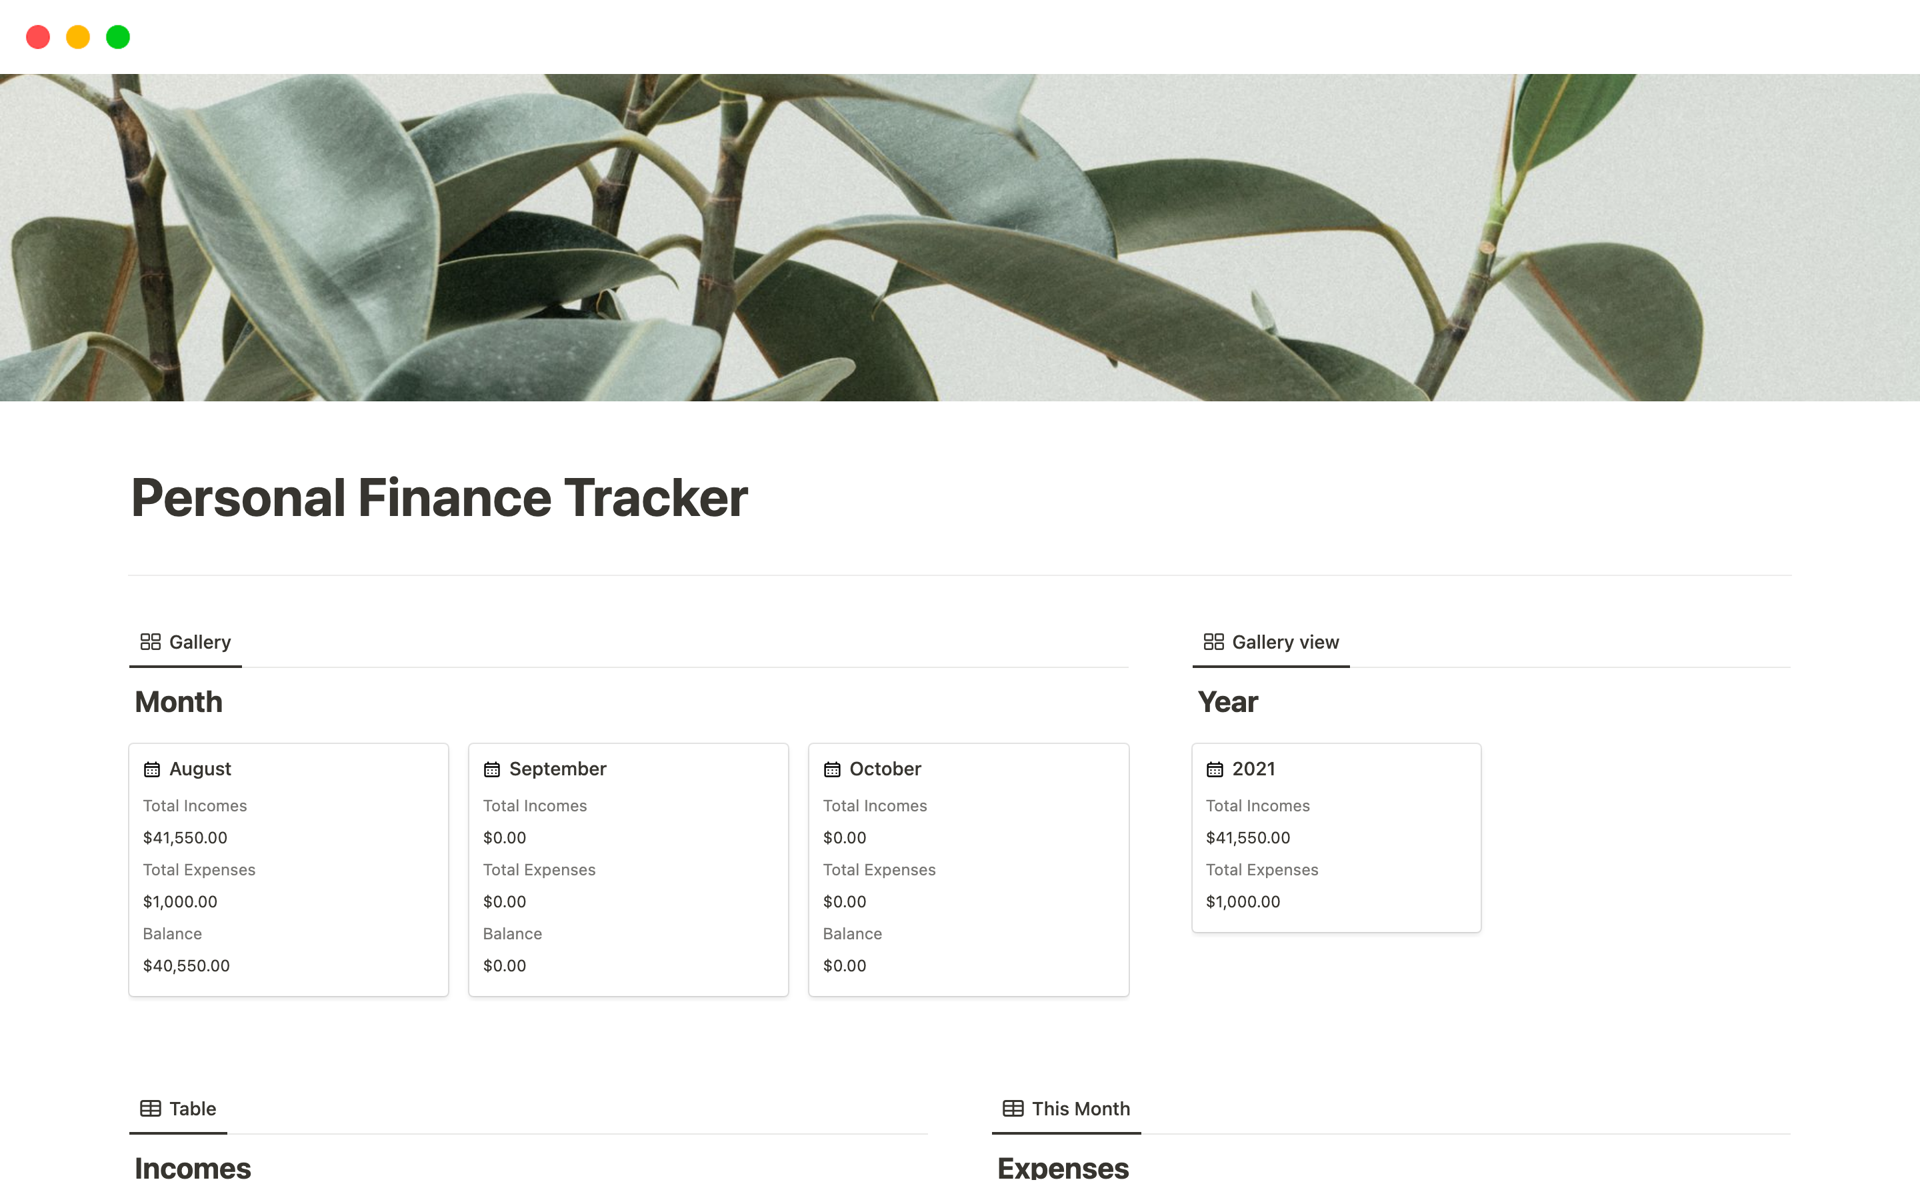 Personal Finance Tracker for Money-Minded Individuals